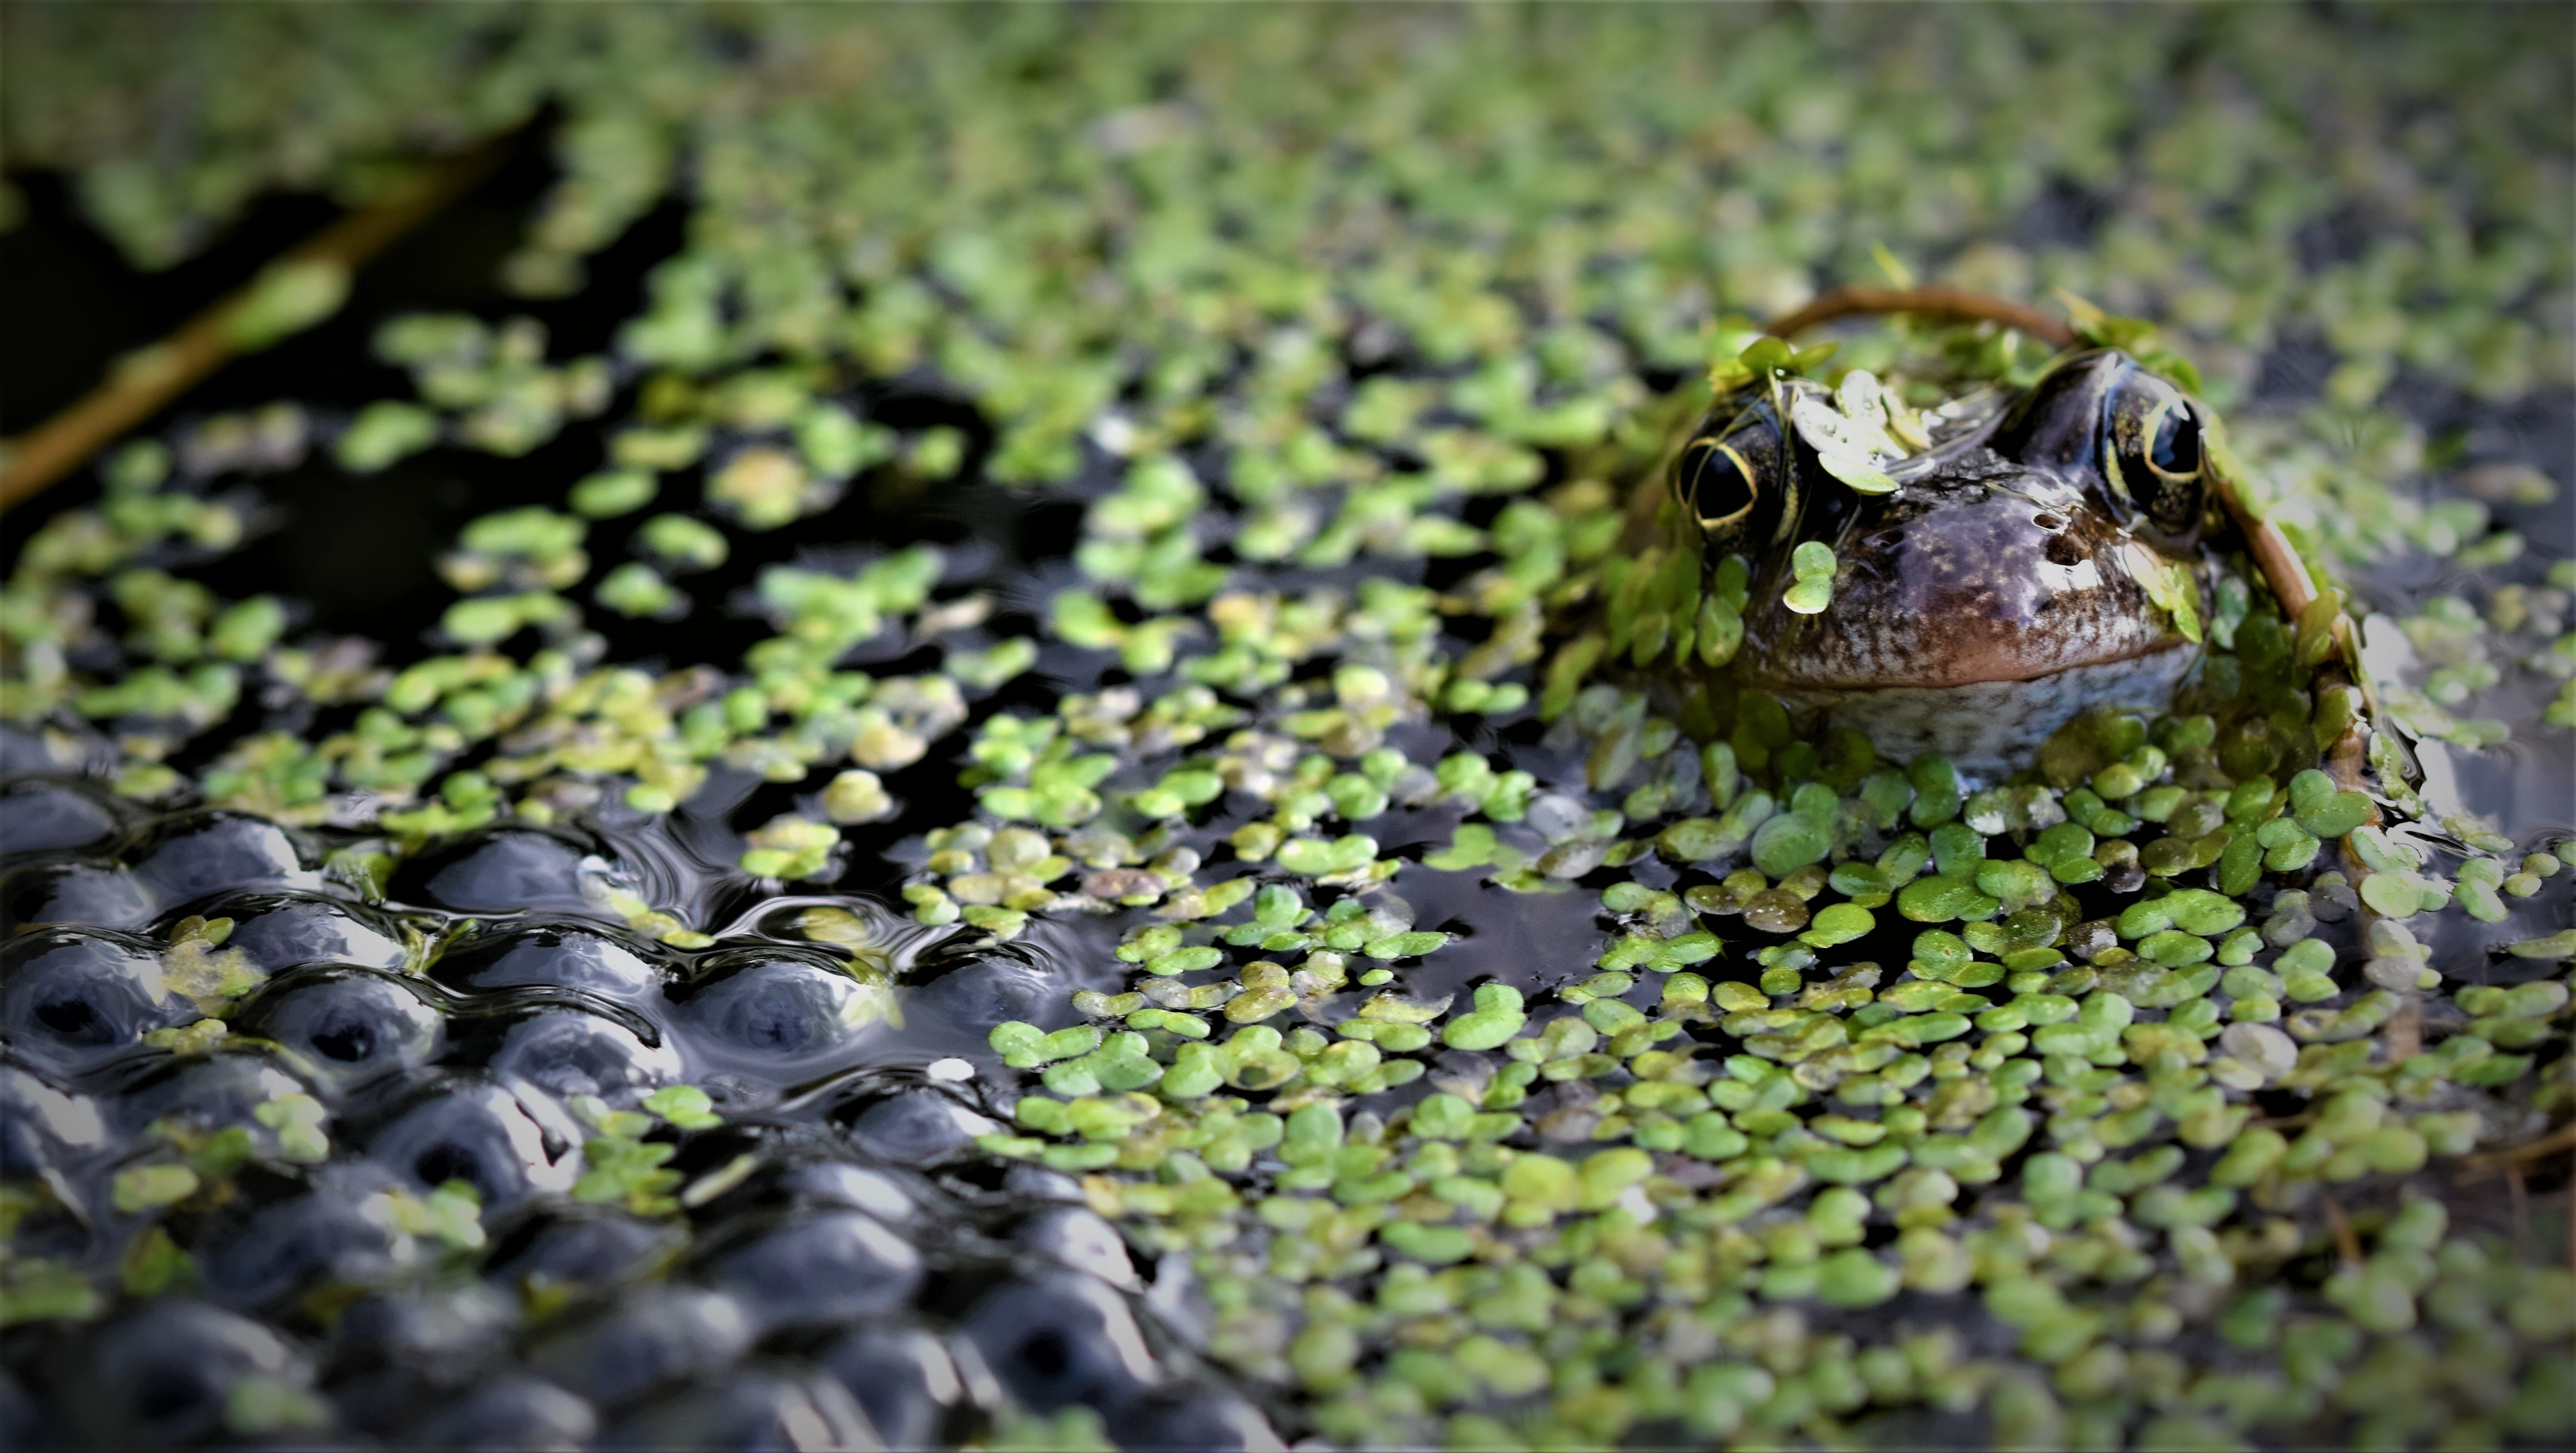 Frog guarding its spawn, Doncaster, South Yorkshire